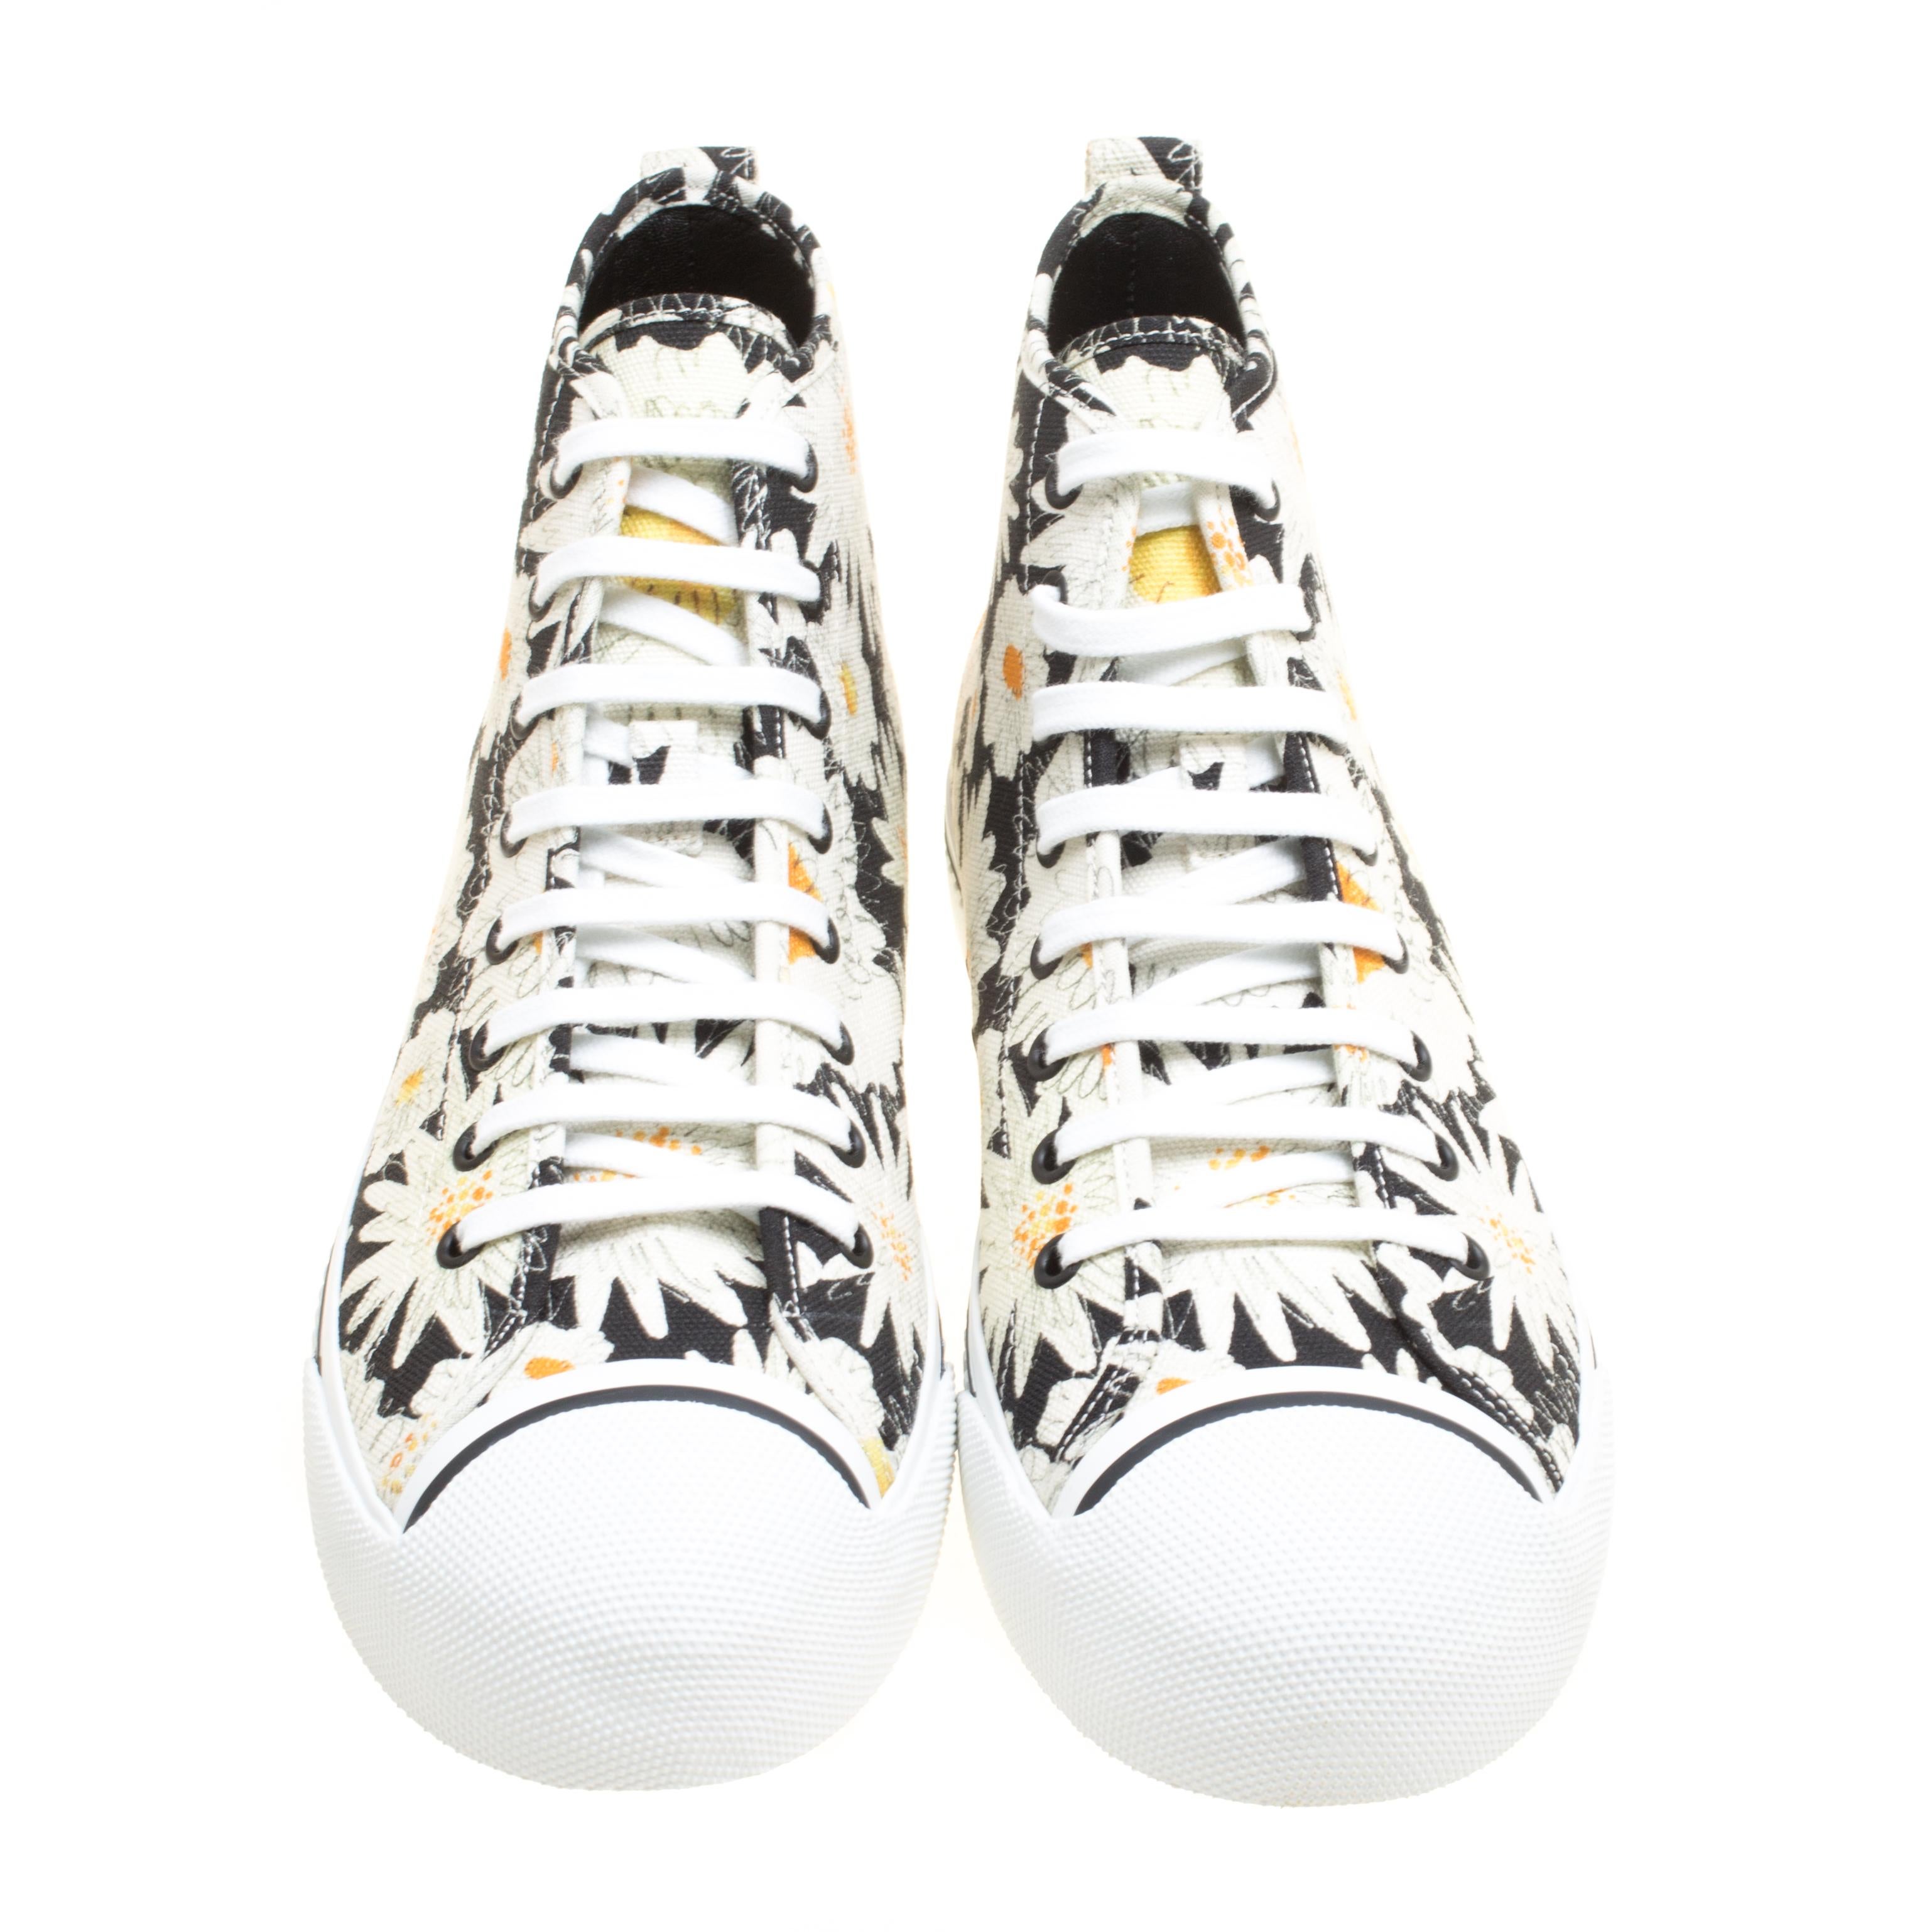 Fashioned to take your style a notch higher, these high top sneakers from Burberry are absolutely worth the dream and the splurge! They've been crafted from canvas and styled with laces on the vamps and floral prints bursting all over.

Includes: